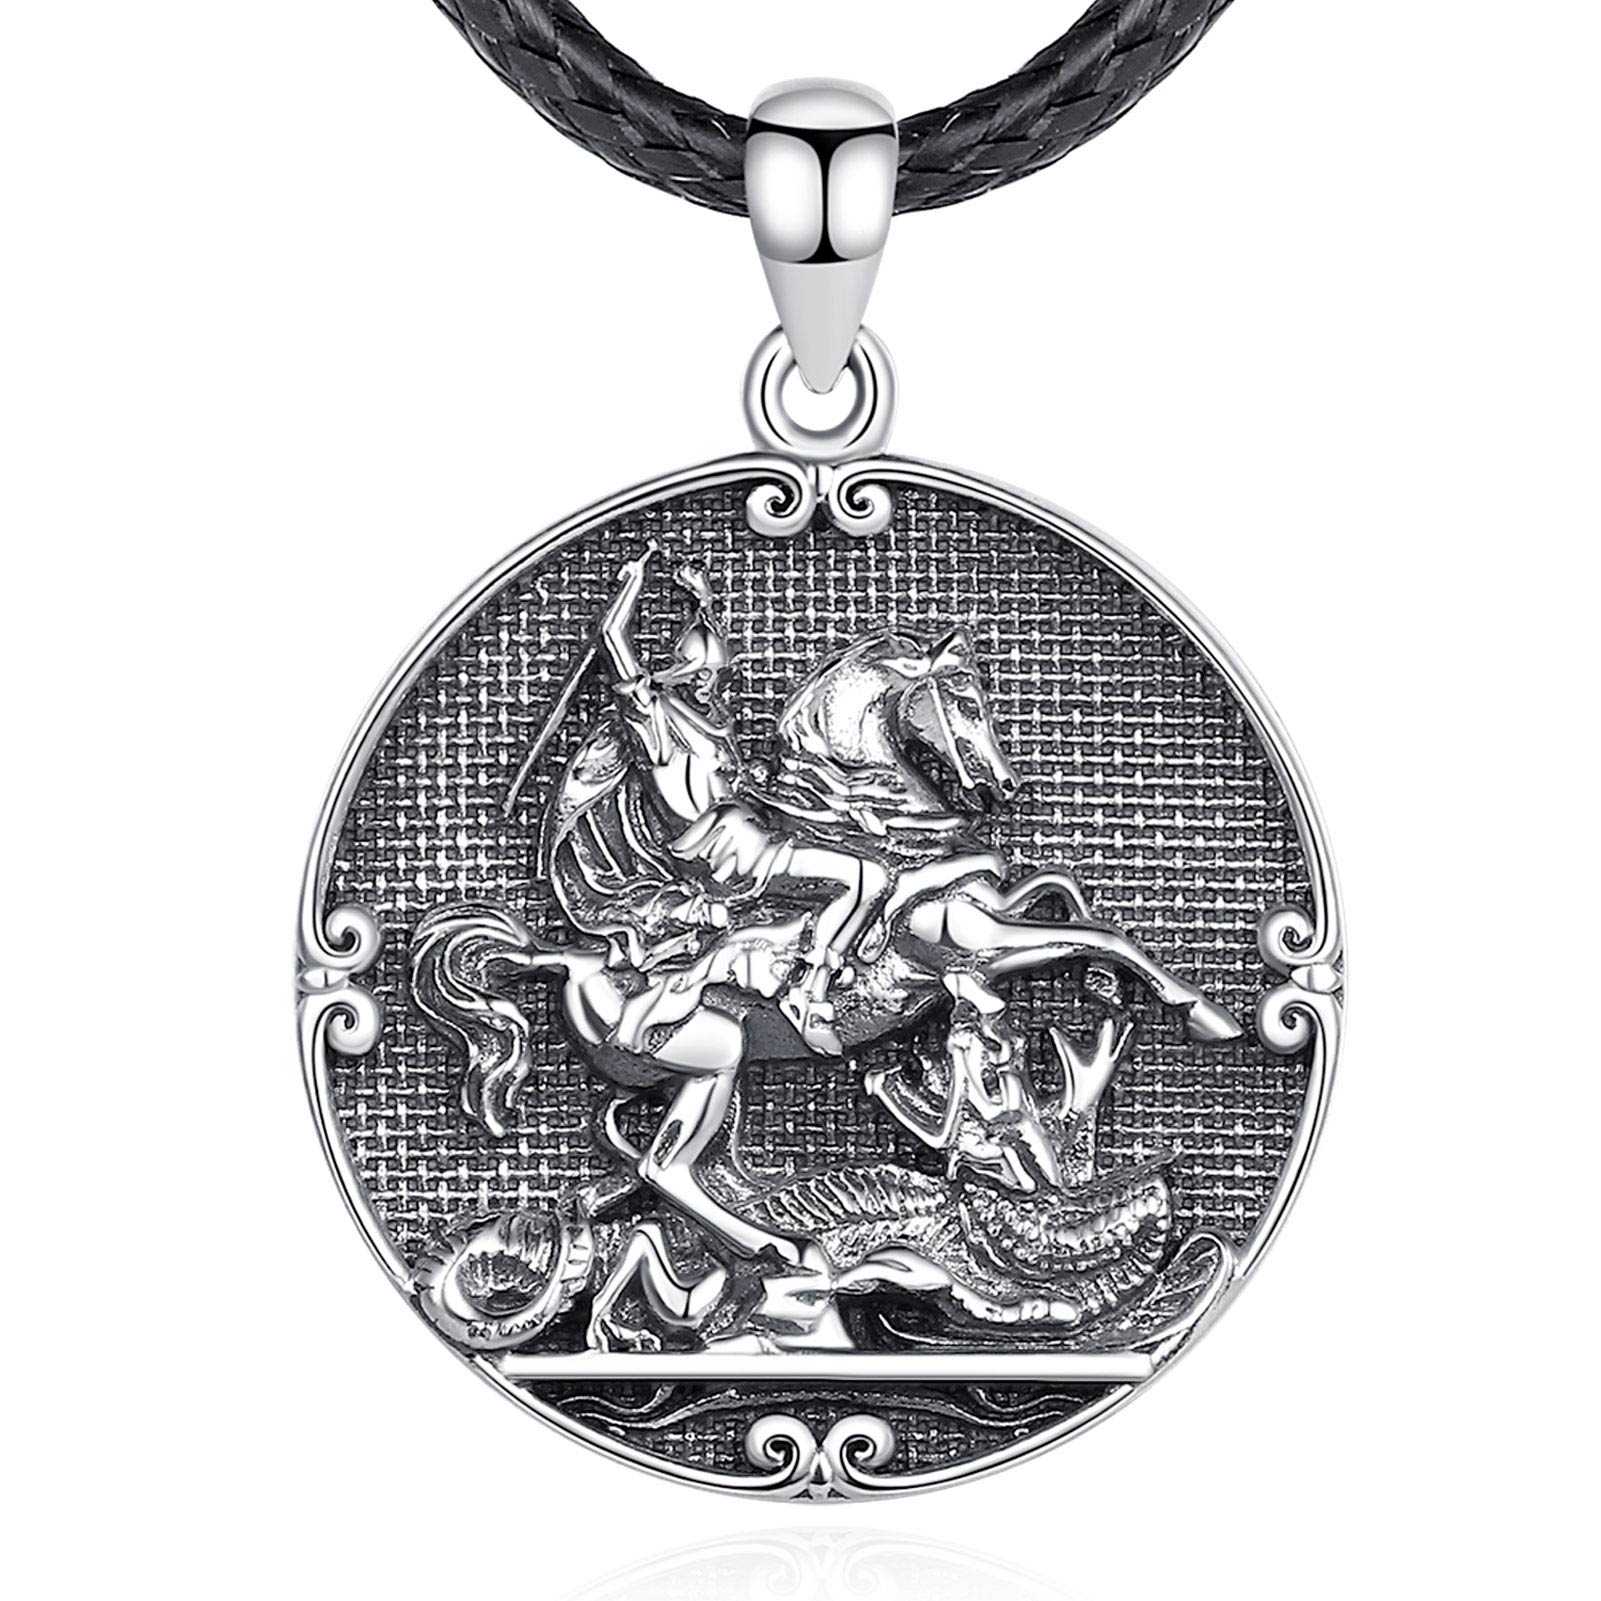 Merryshine 925 Sterling Silver Embossing Vintage Oxidized Saint George Jewelry Men Necklace